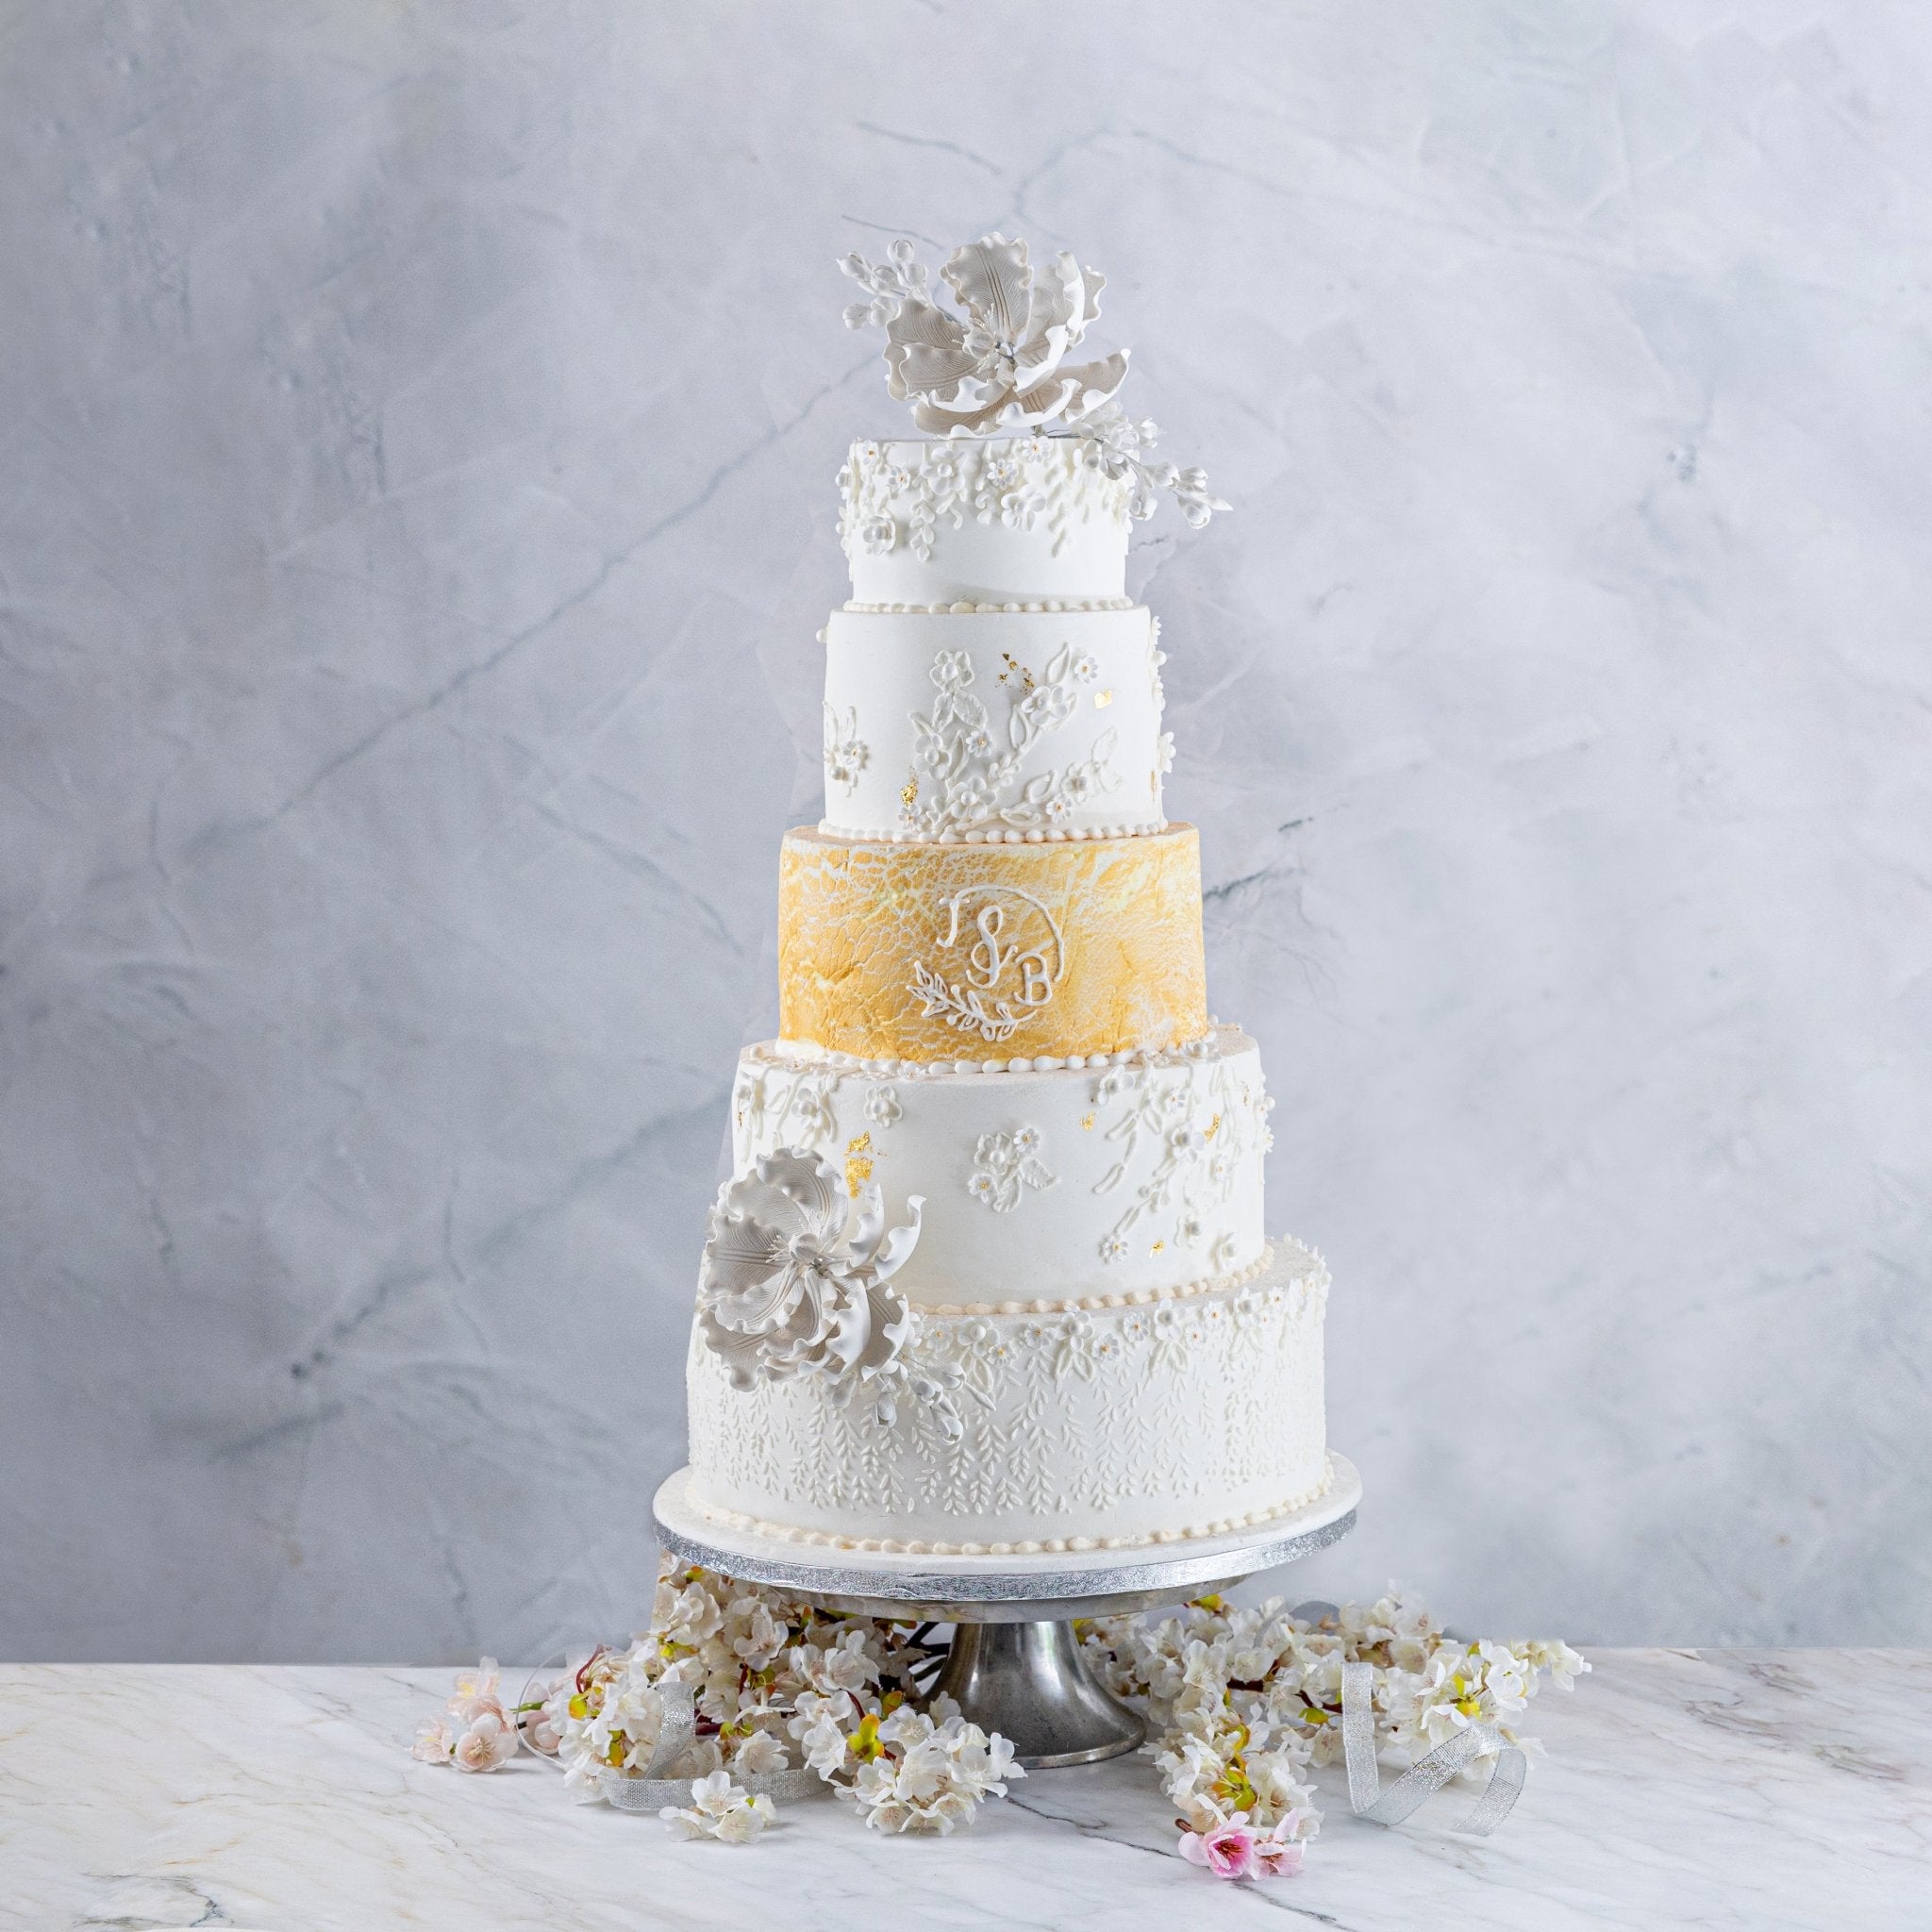 Floral Dream Wedding Cake - Jack and Beyond